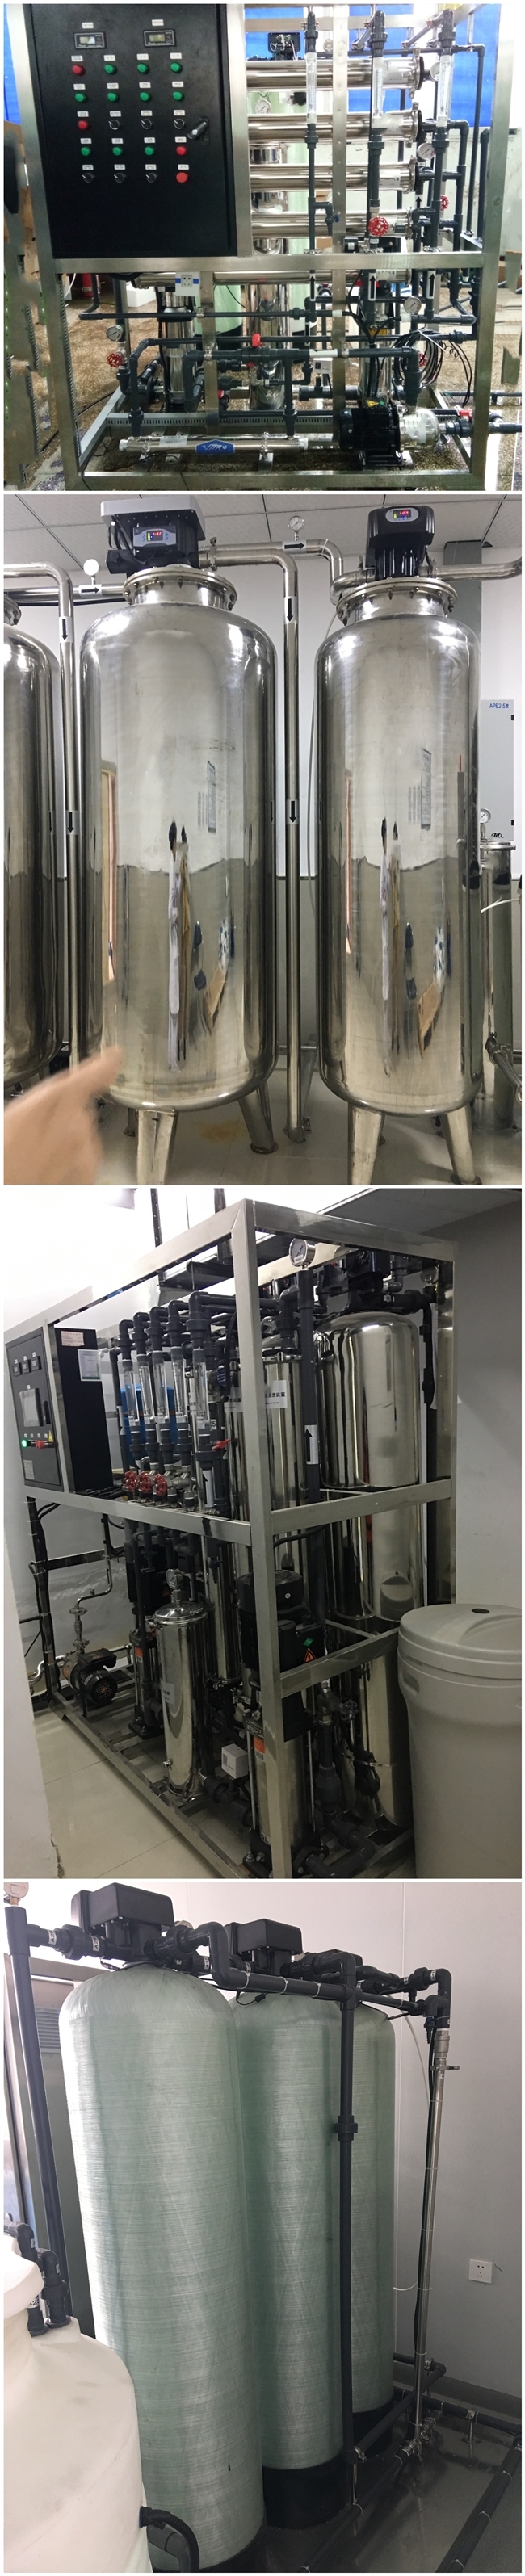 1tph Drinking Water Treatment System with Reverse Osmosis 66